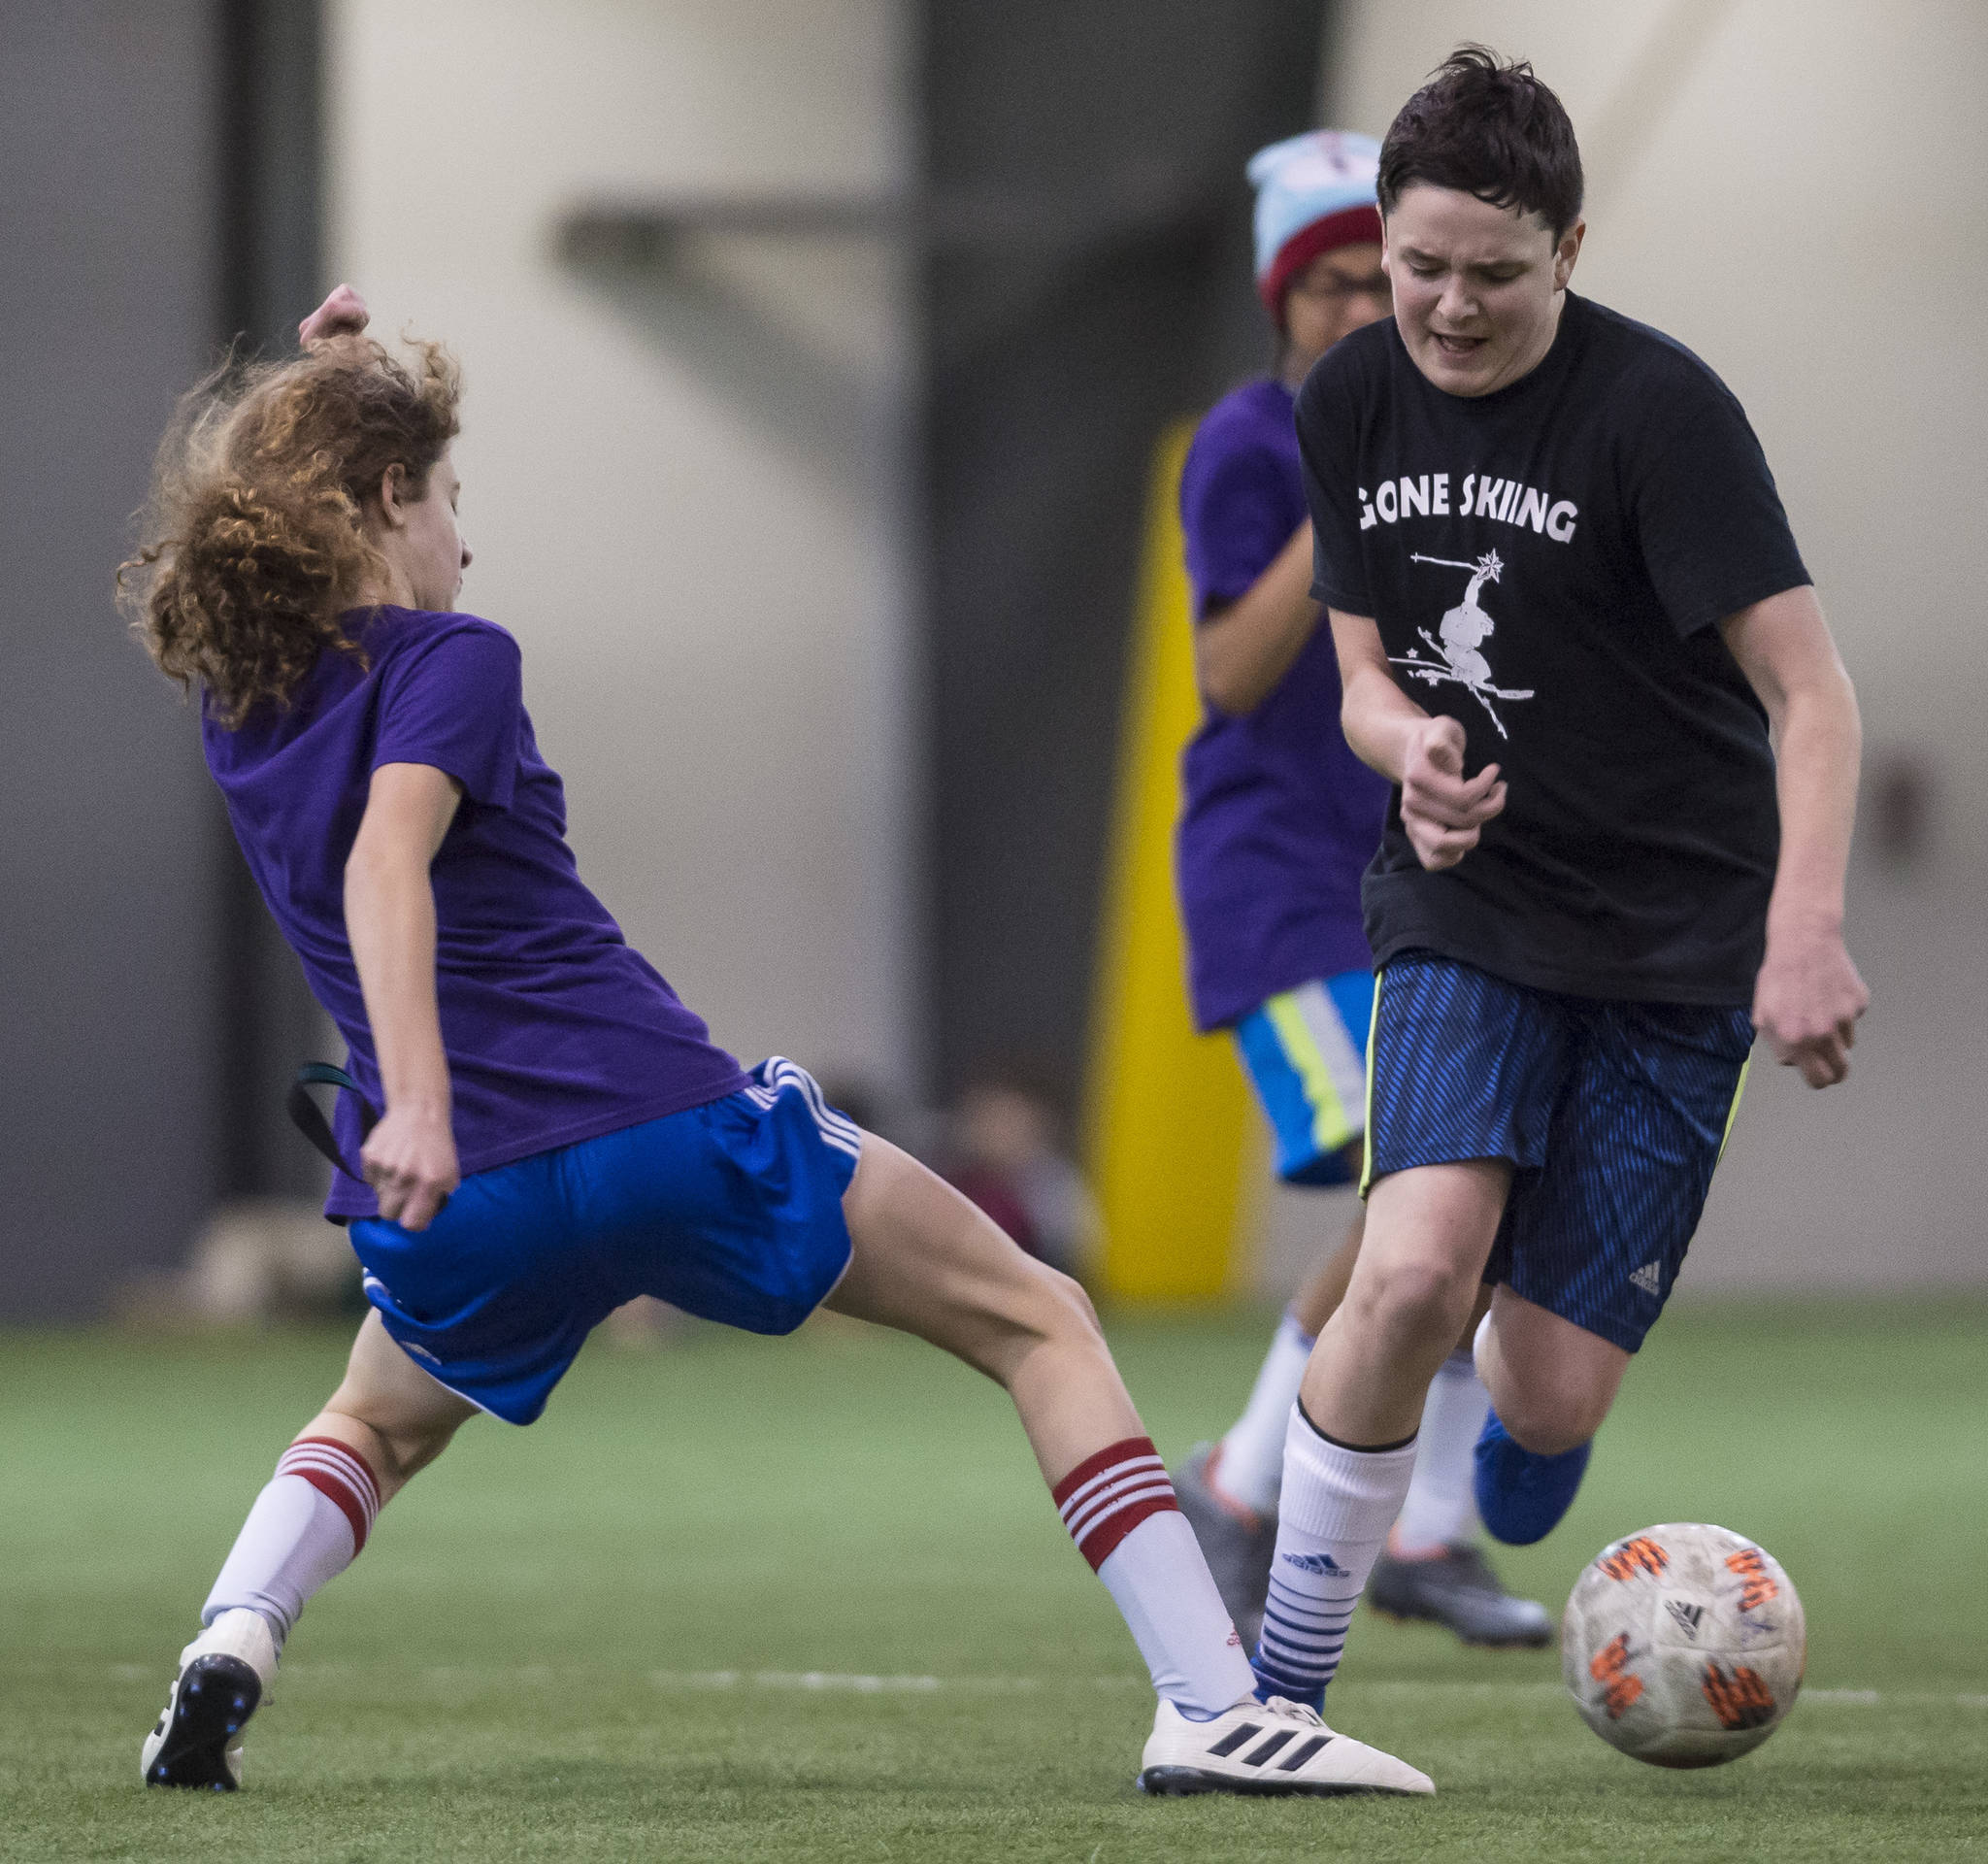 Grumpsicles play against Gone Skiing at the annual Holiday Cup Soccer Tournament at the Wells Fargo Dimond Park Field House on Wednesday, Dec. 26, 2018. (Michael Penn | Juneau Empire)